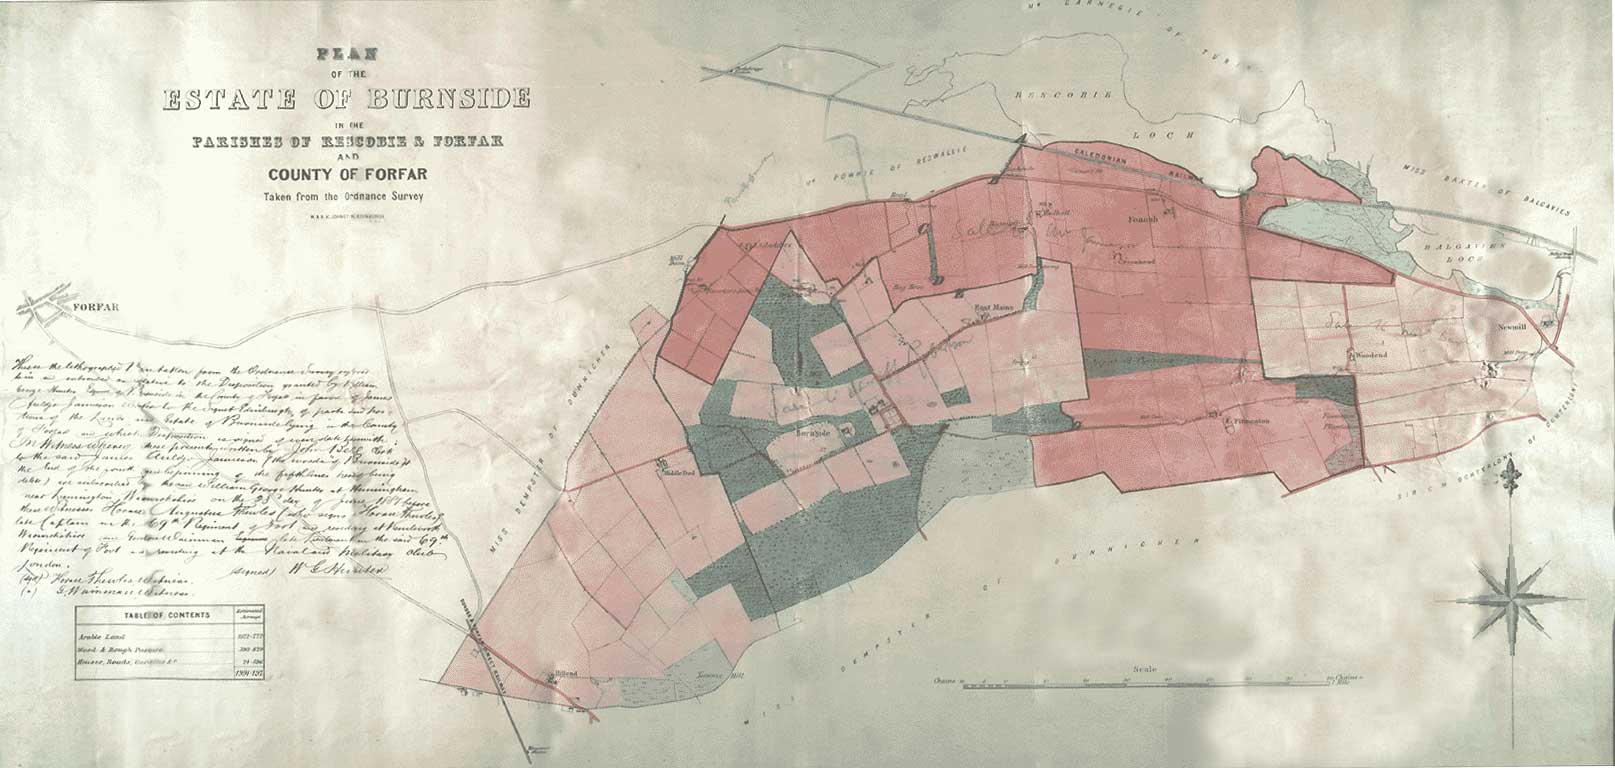 a detailed plan of the estate of Burnside